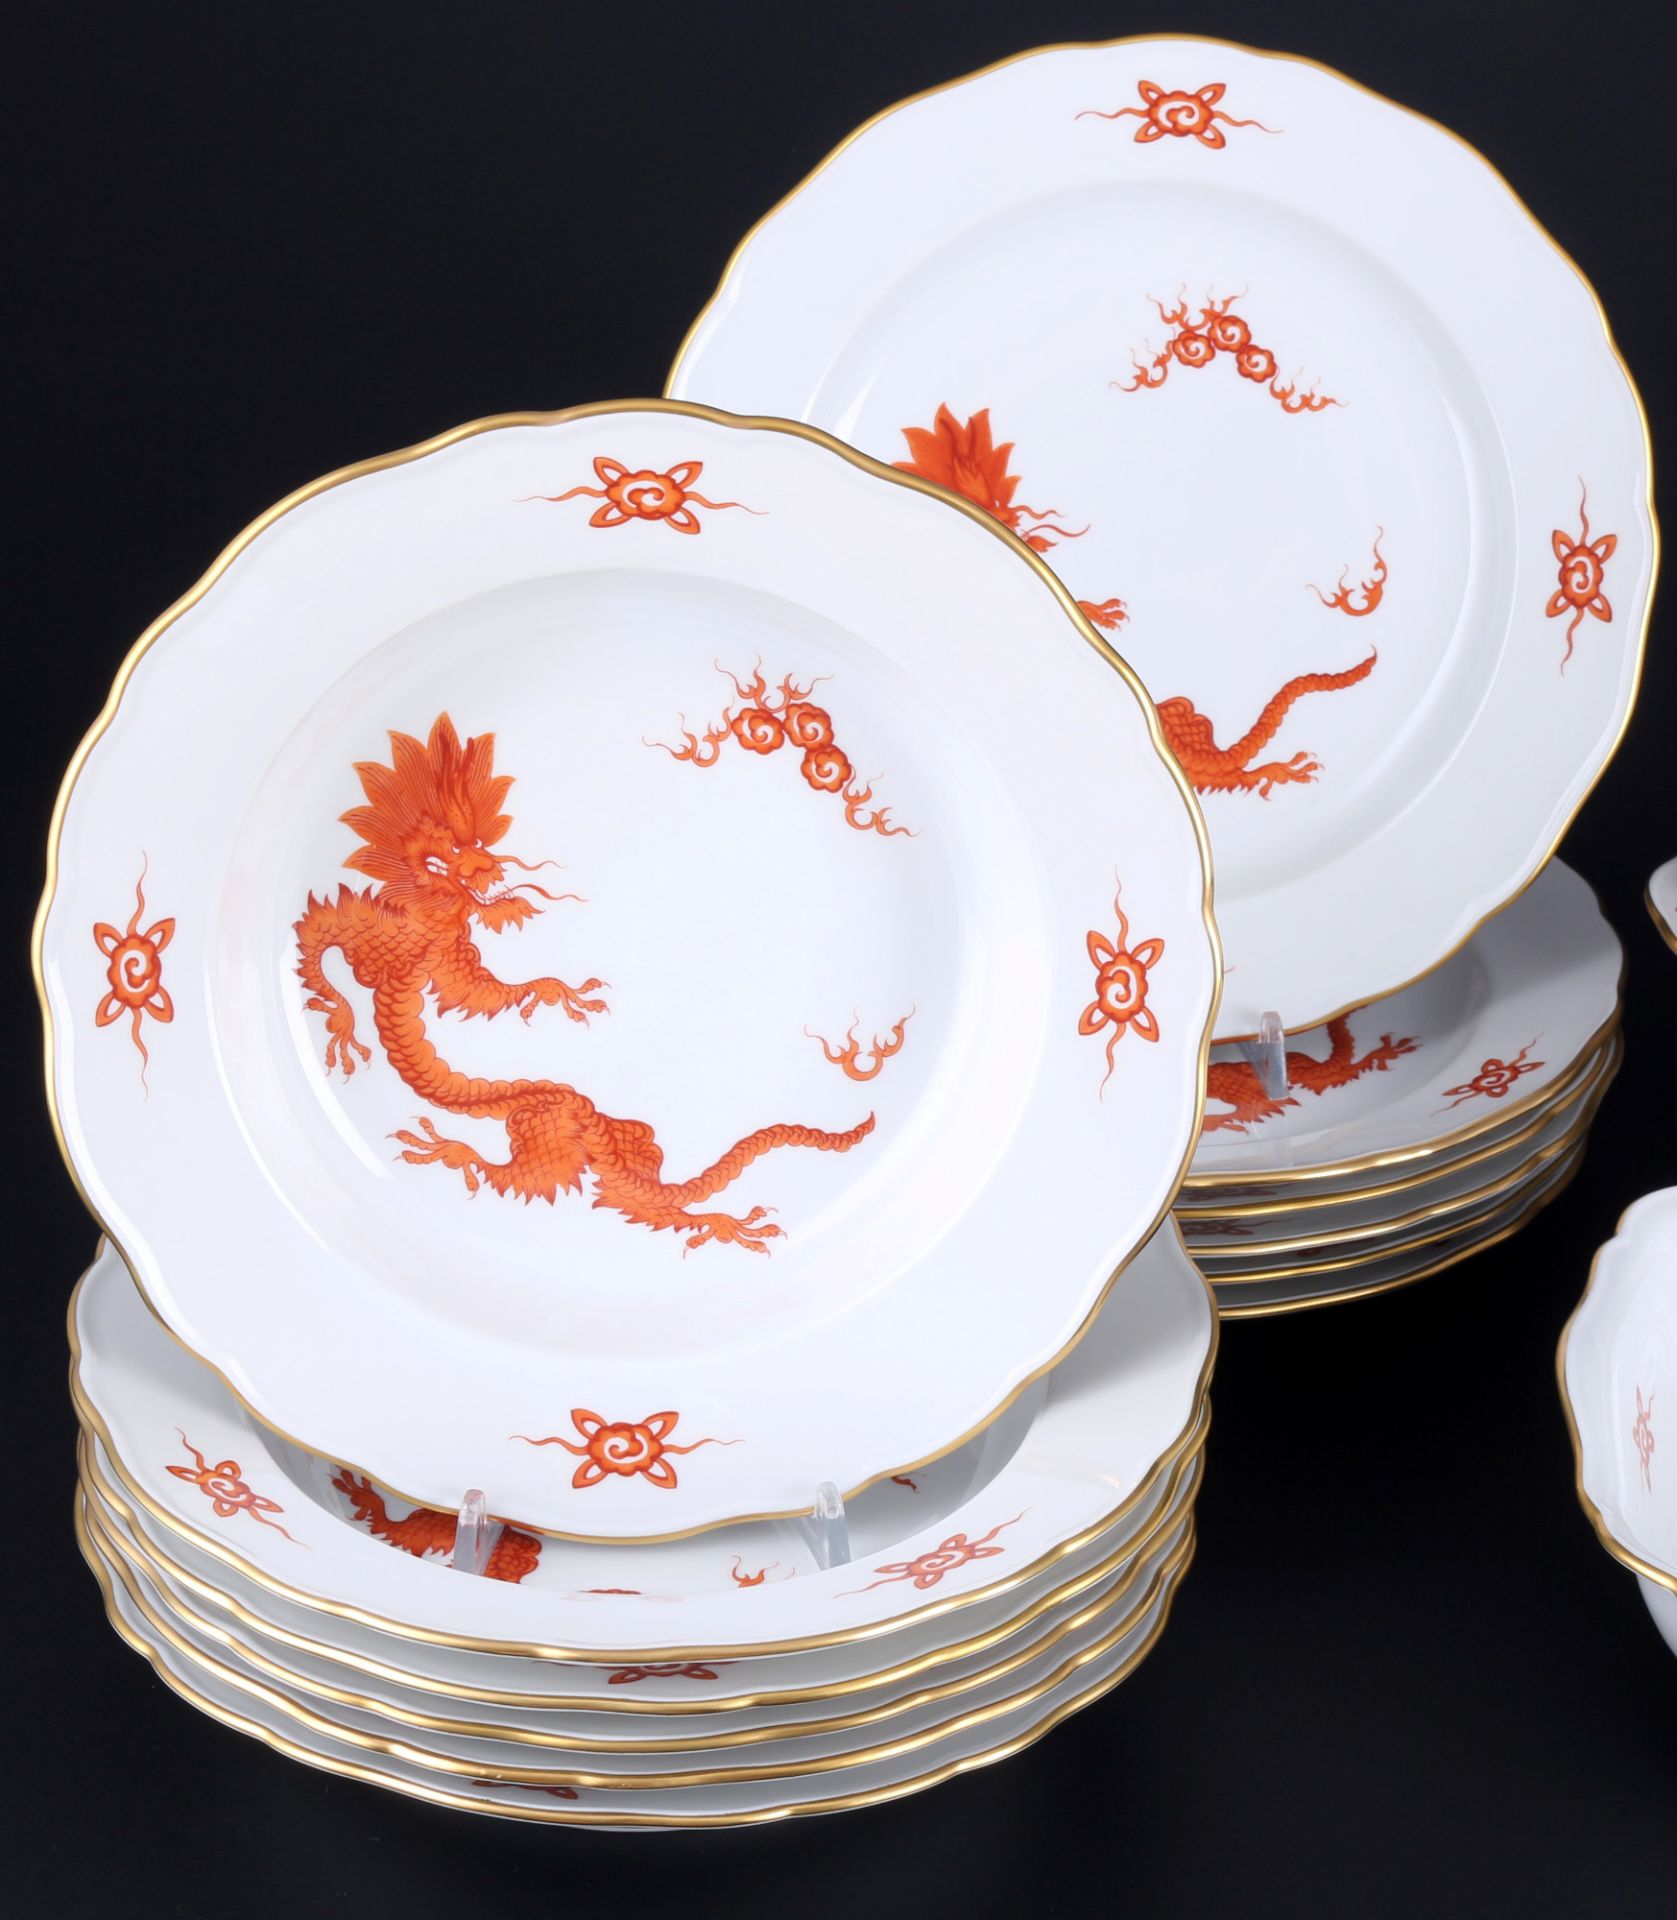 Meissen Red Ming Dragon dinner service for 6 persons 1st choice, Speiseservice für 6 Personen 1.Wahl - Image 2 of 5